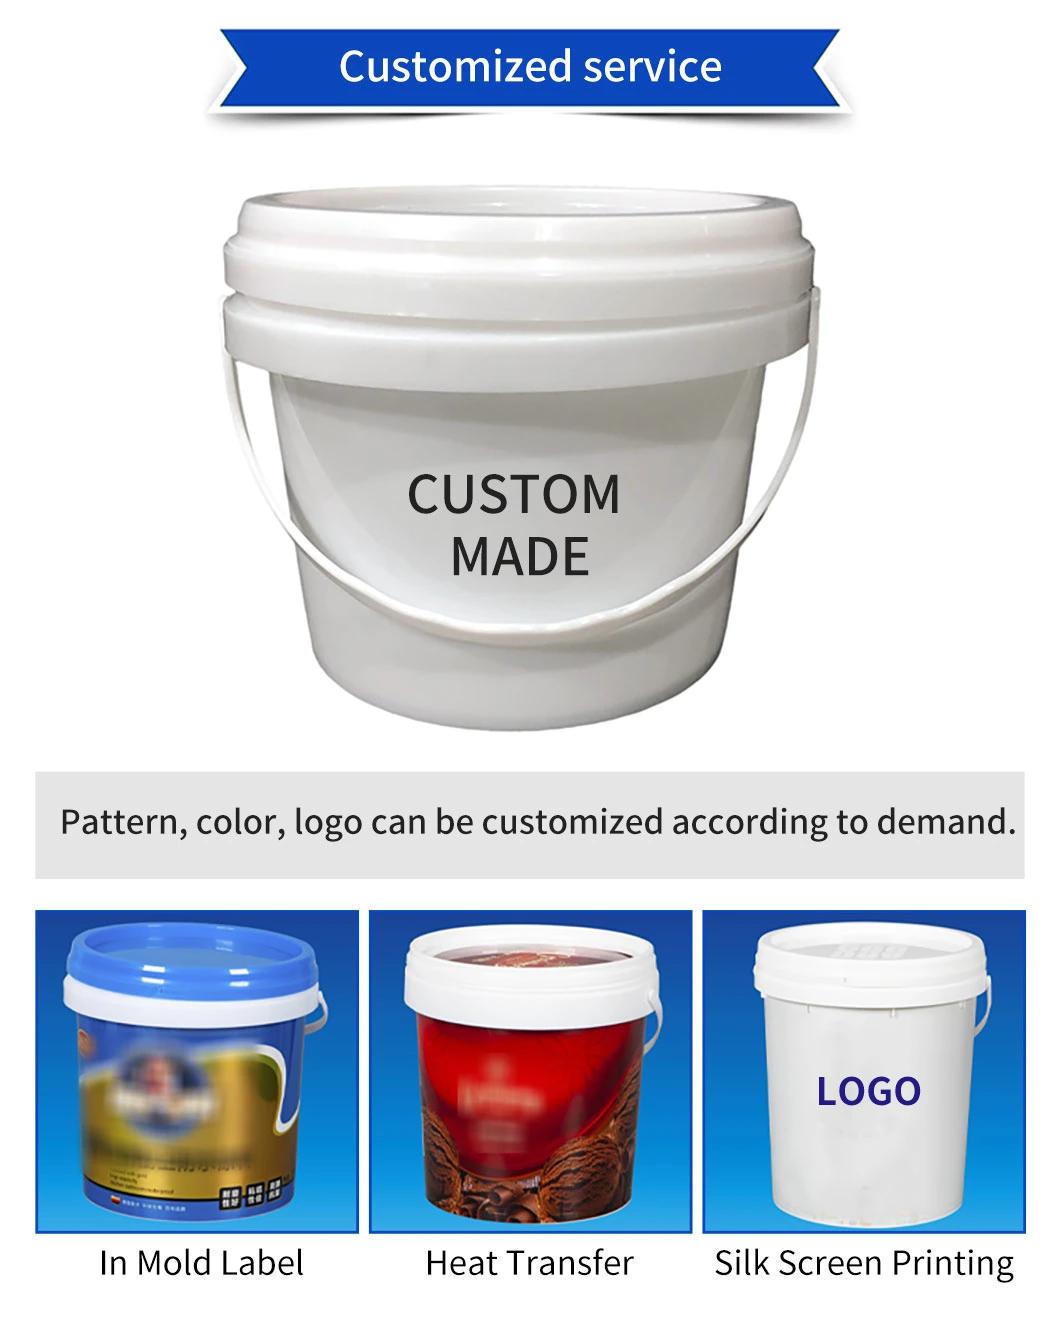 Wholesale Cheap Price PP HDPE Paint Packing 25L Plastic Bucket Pail with Handle and Spout Lid